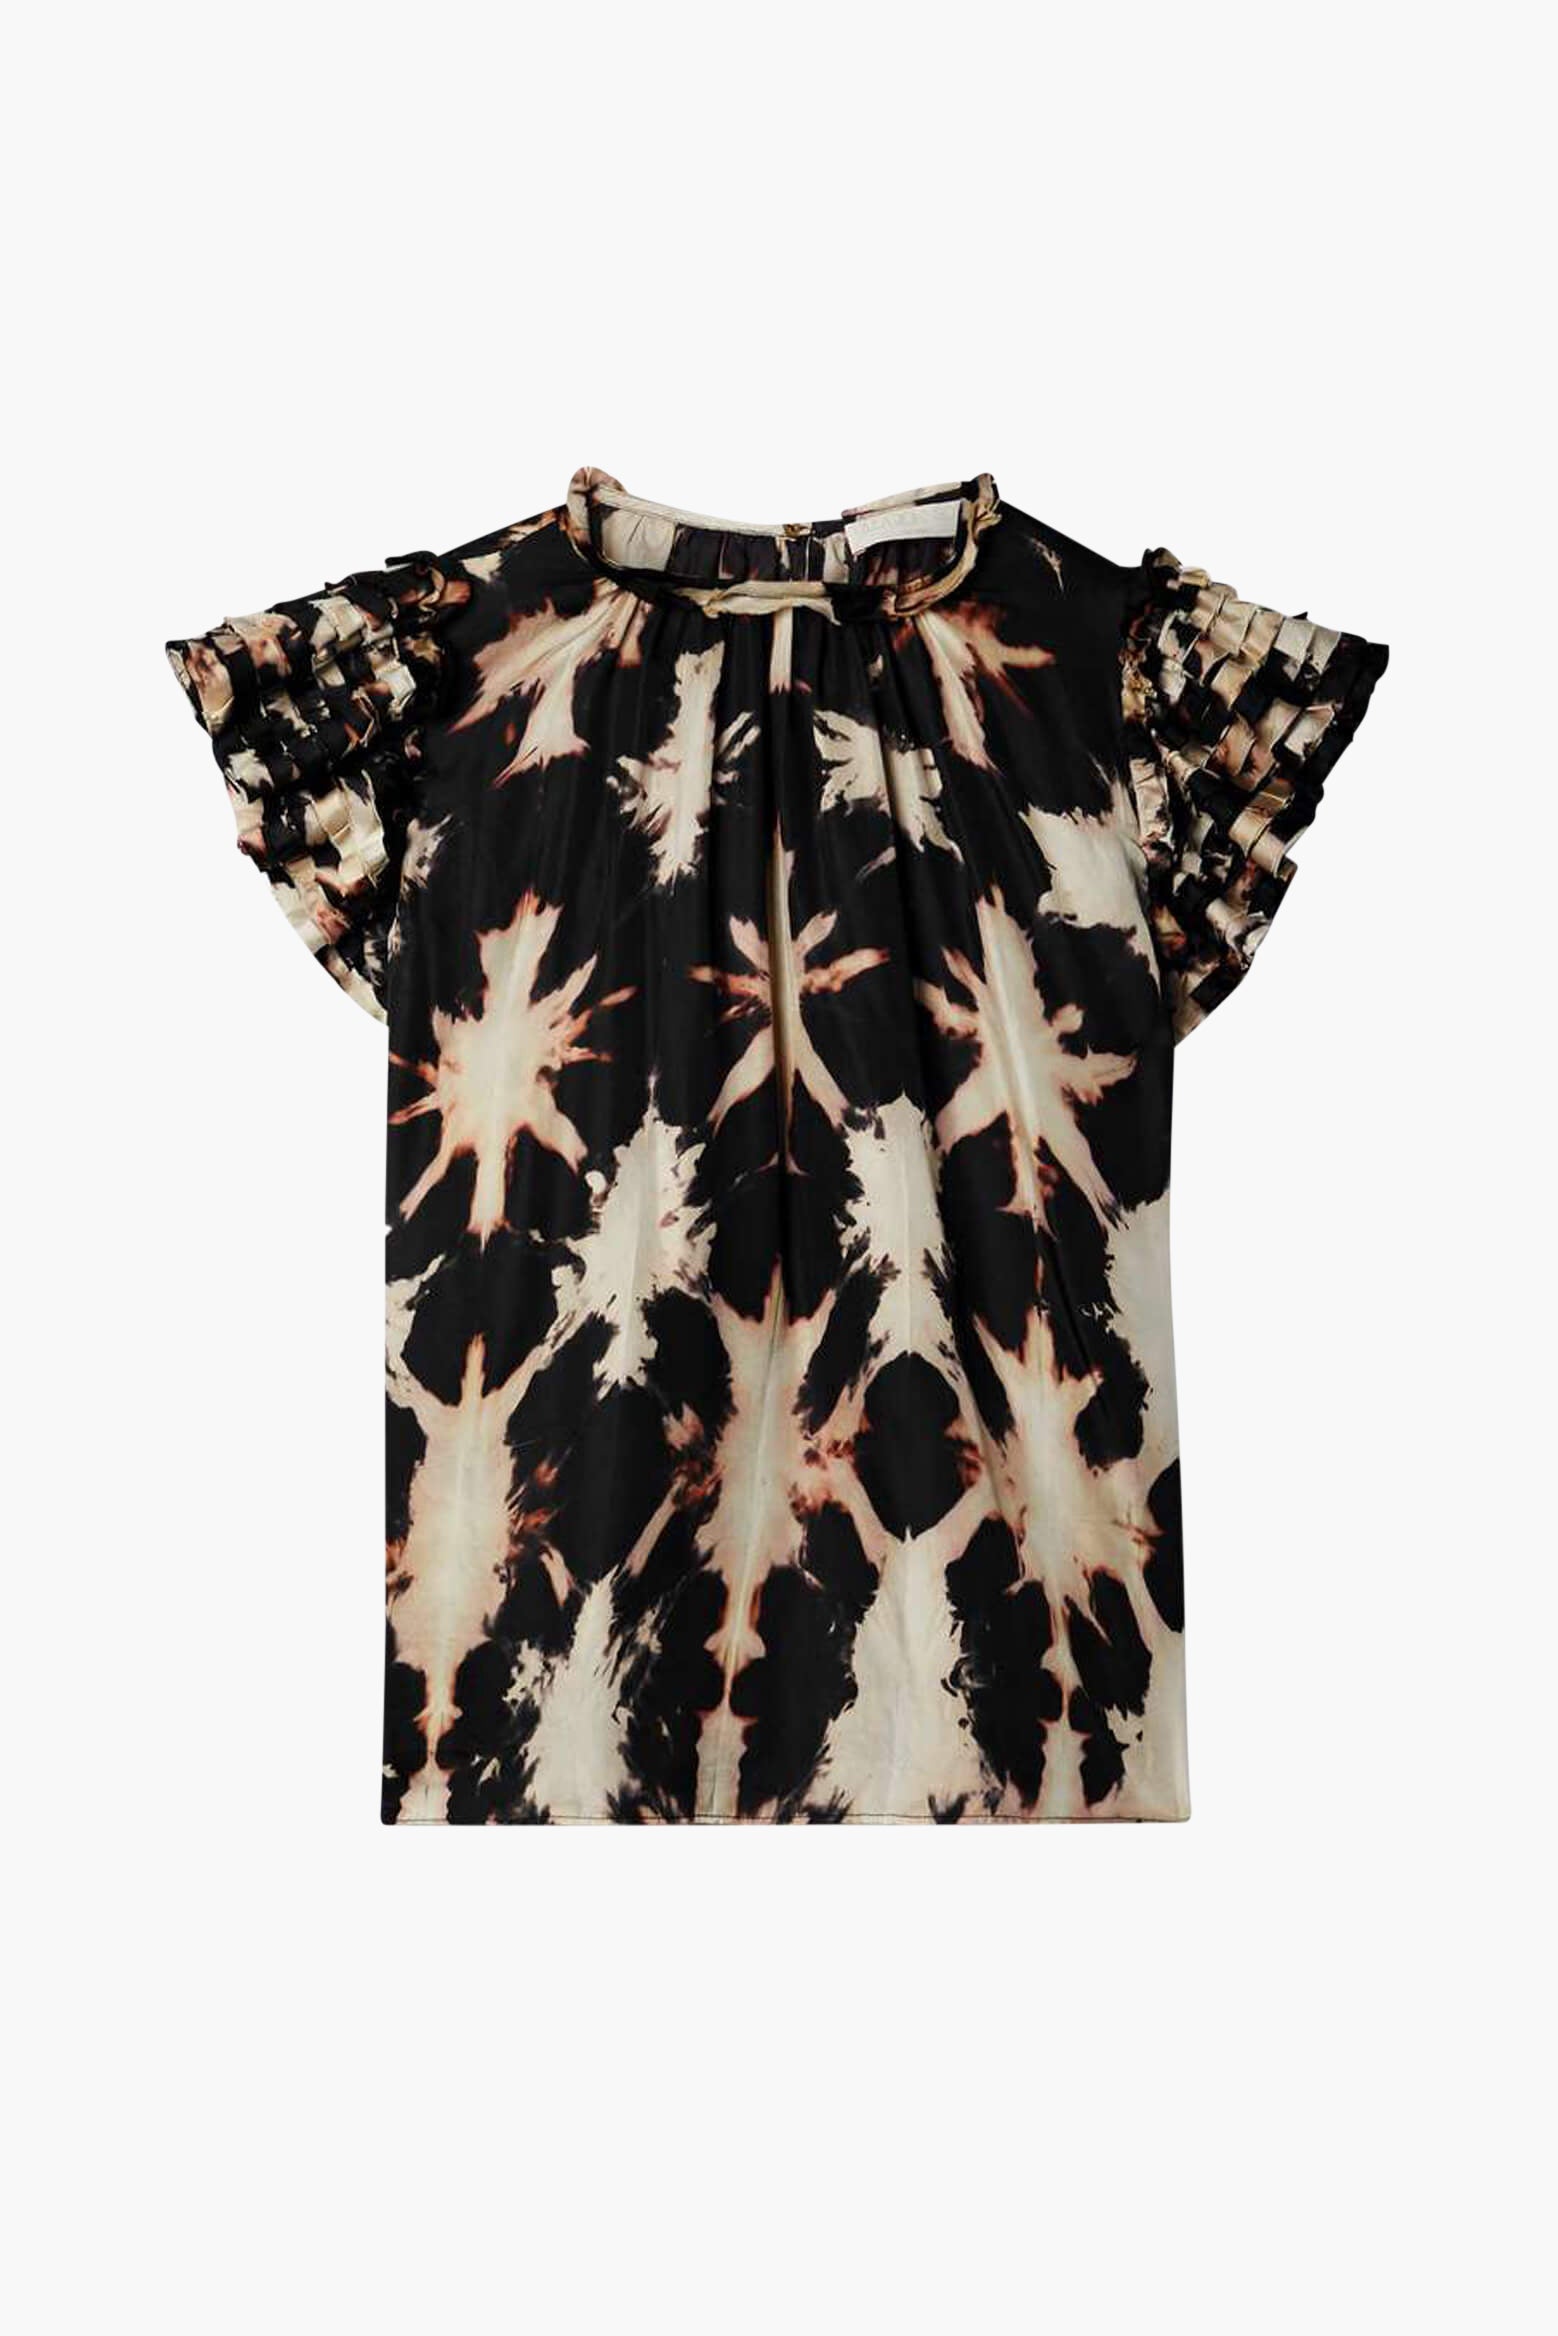 Ulla Johnson Micaela Top in Noir Blur available at TNT The New Trend Australia.